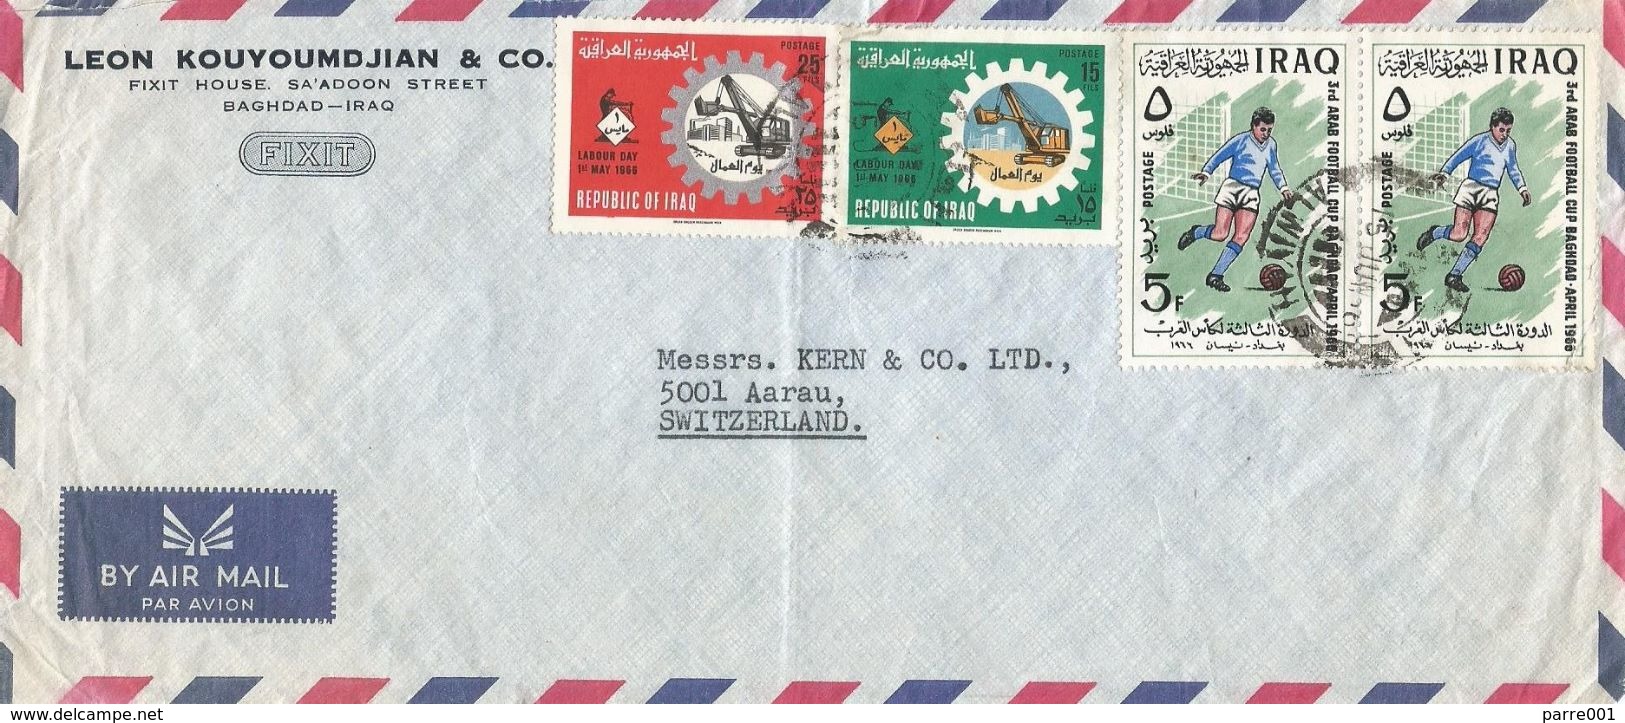 Iraq 1966 Baghdad 3rd Arab Football Cup ILO Labour Day Censored Cover - AFC Asian Cup